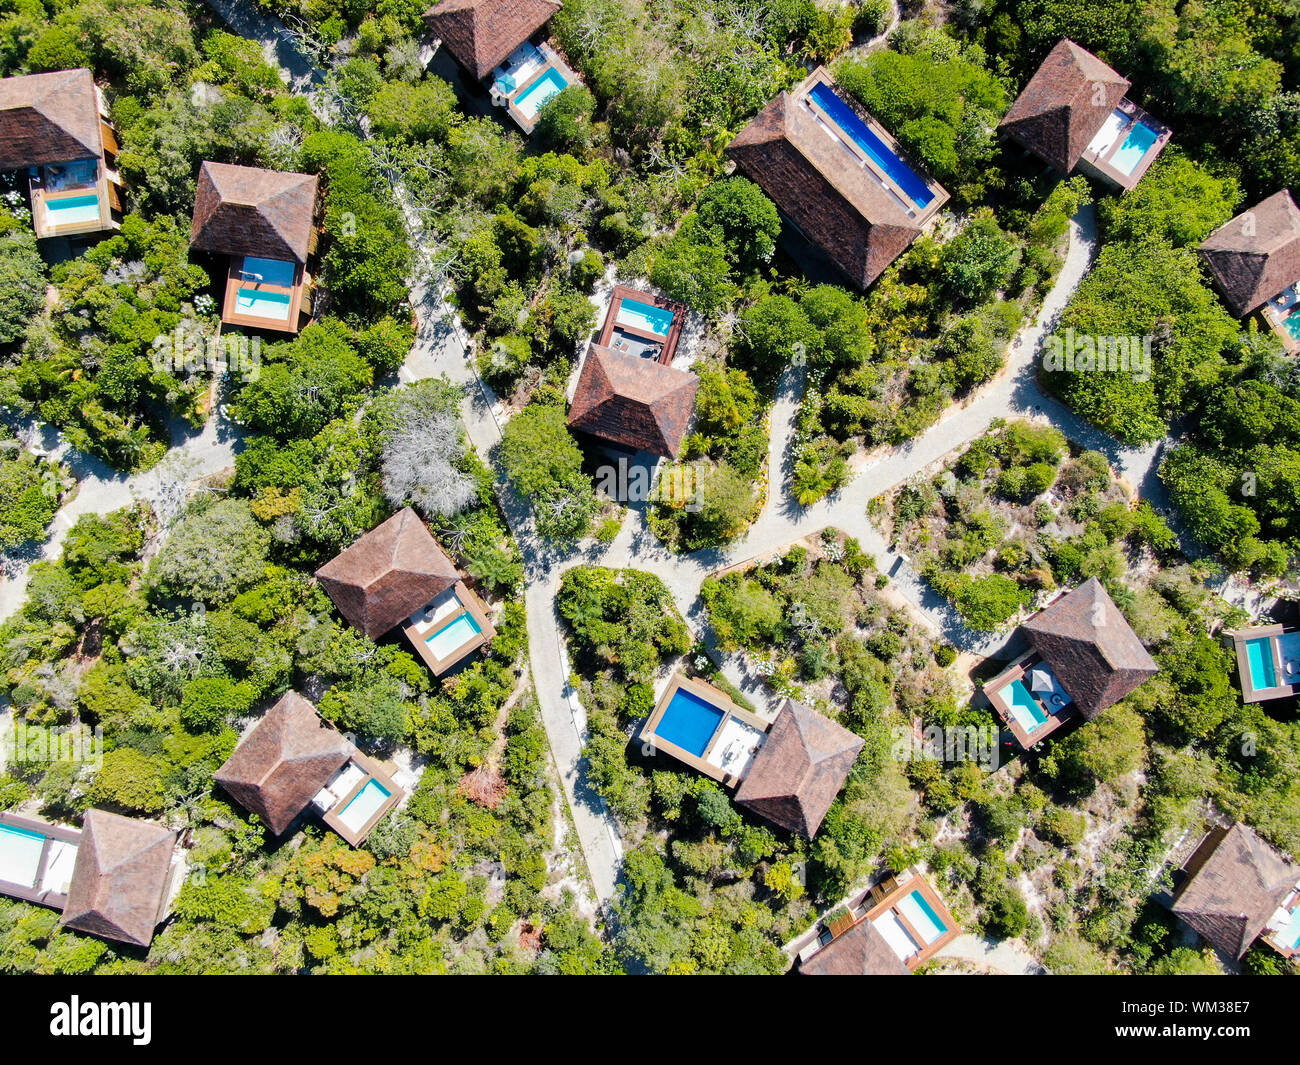 Aerial view of luxury villa with swimming pool in tropical forest. Private tropical villa with swimming pool among tropical garden with palm trees Stock Photo